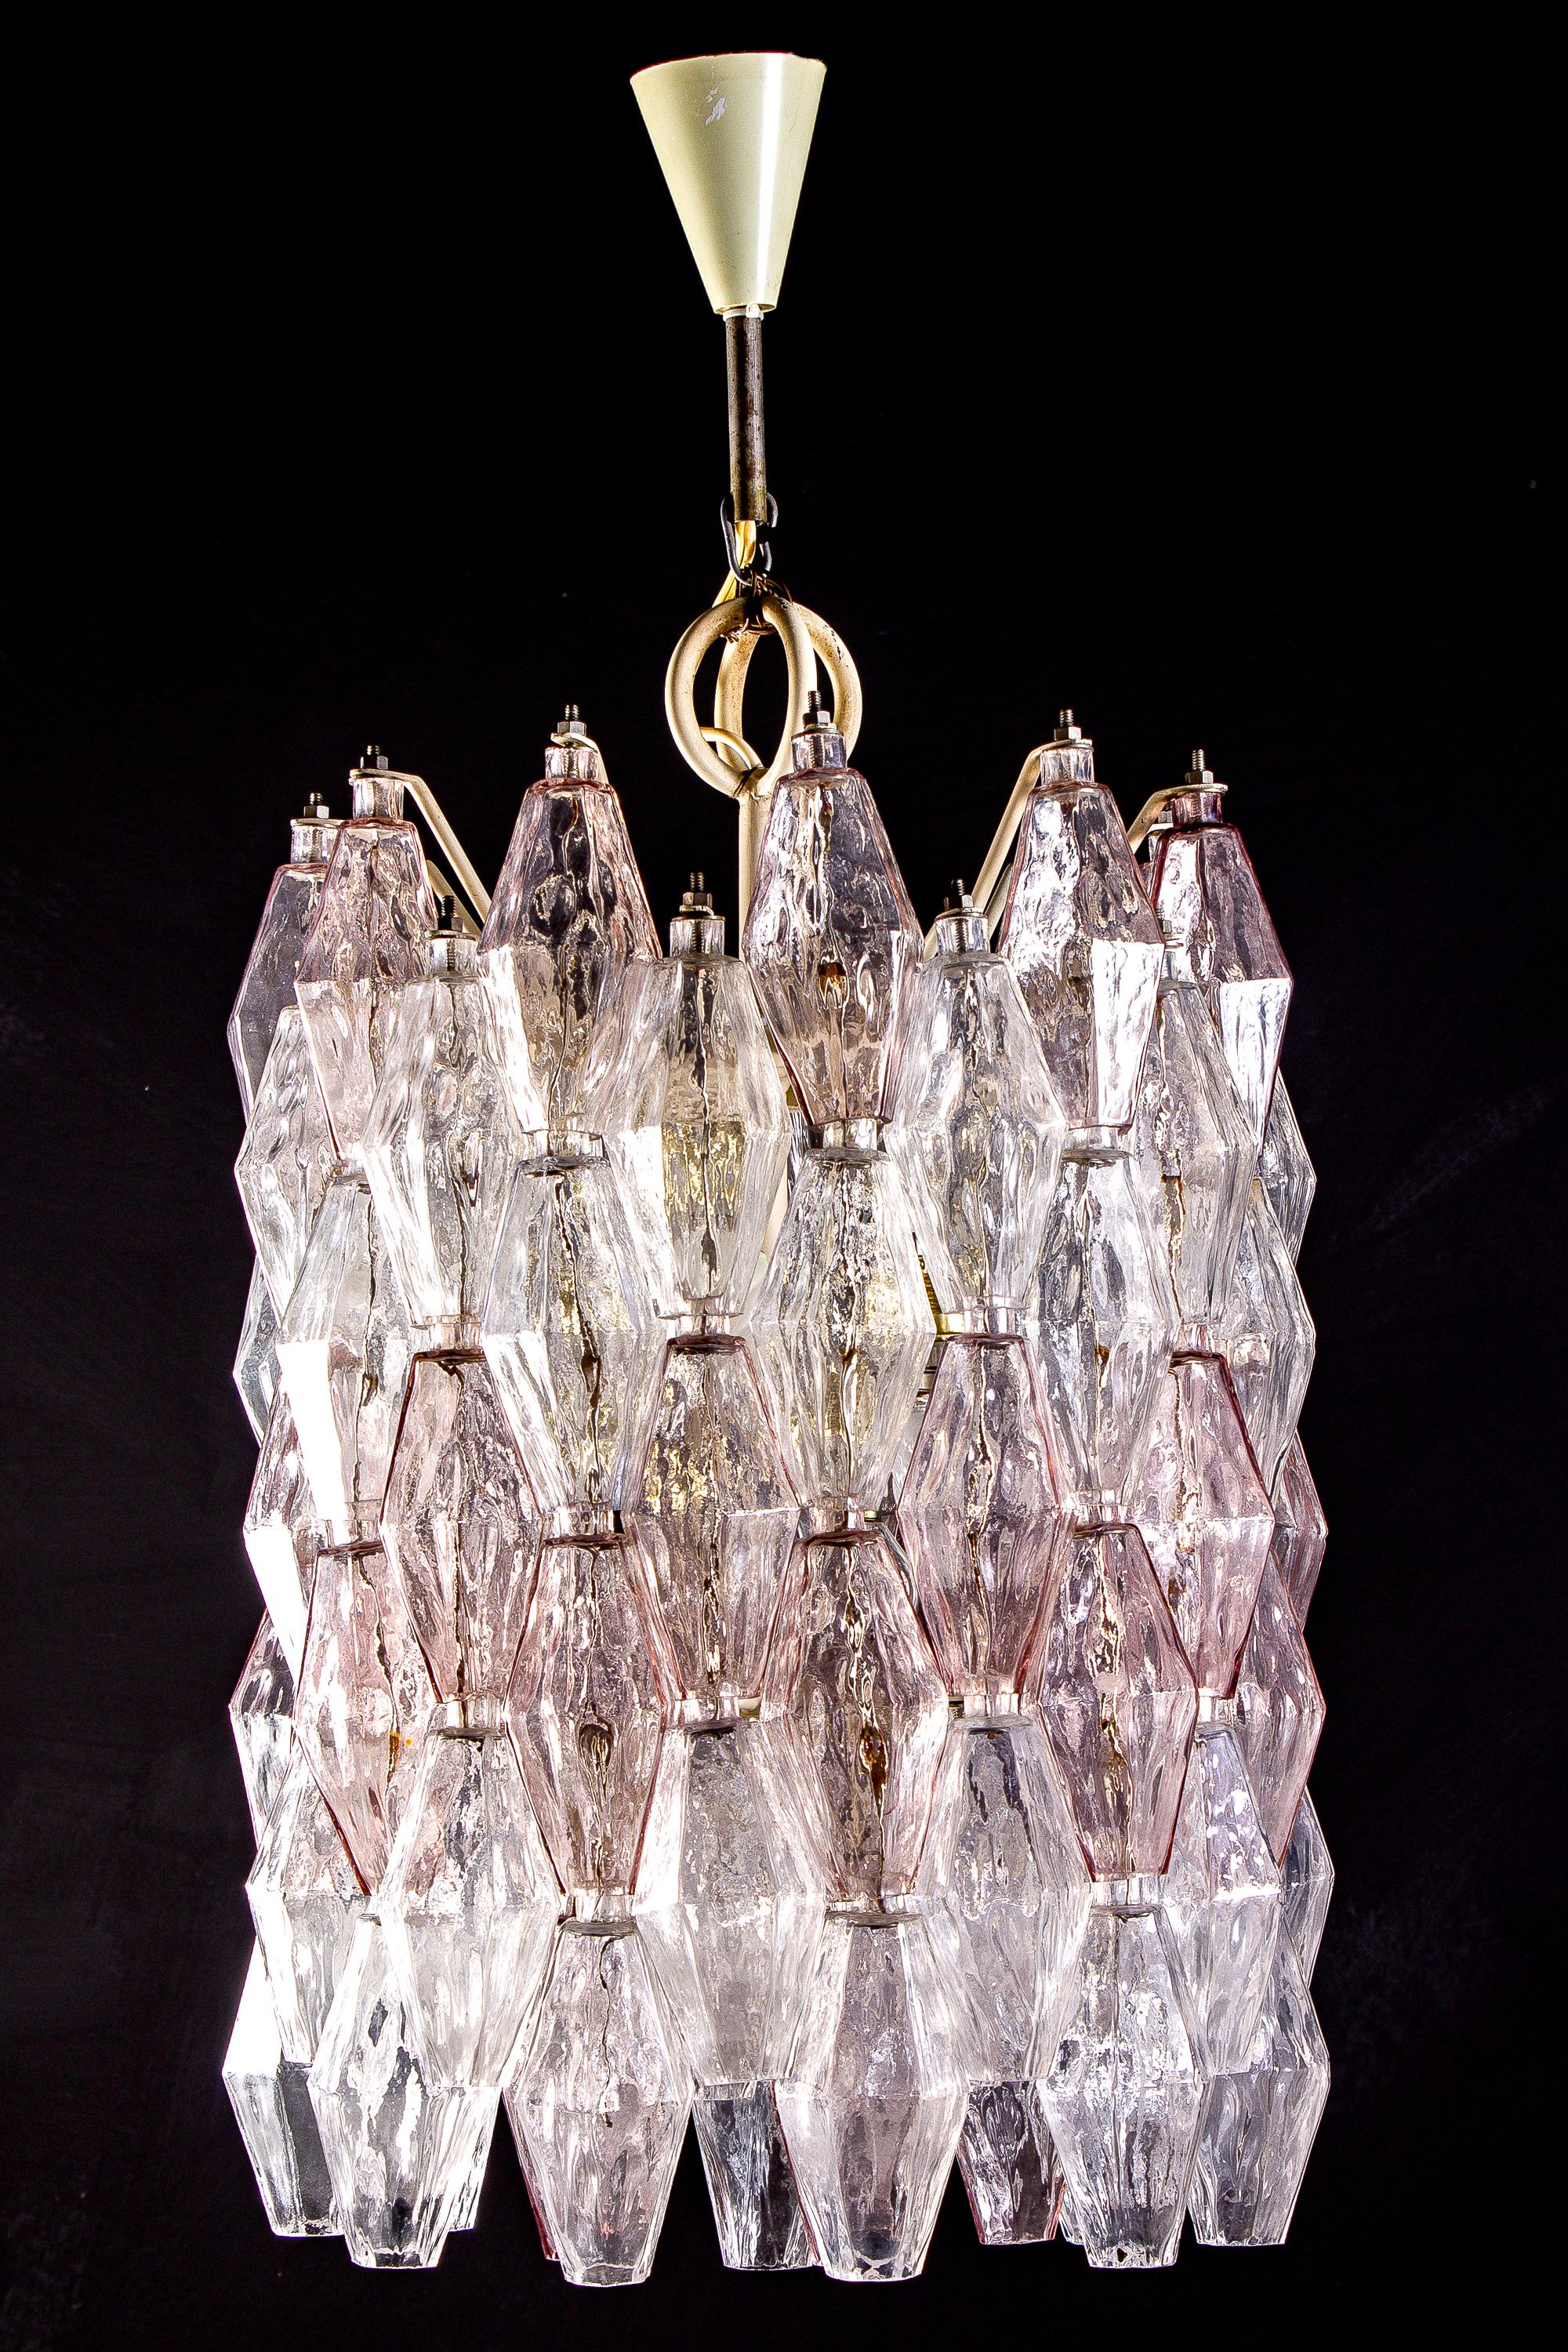 Fabulous original Venini Poliedri chandelier by Carlo Scarpa. Rare combination of light pink and Ice colored Murano glass.
Ivory painted frame in very good original condition.
 